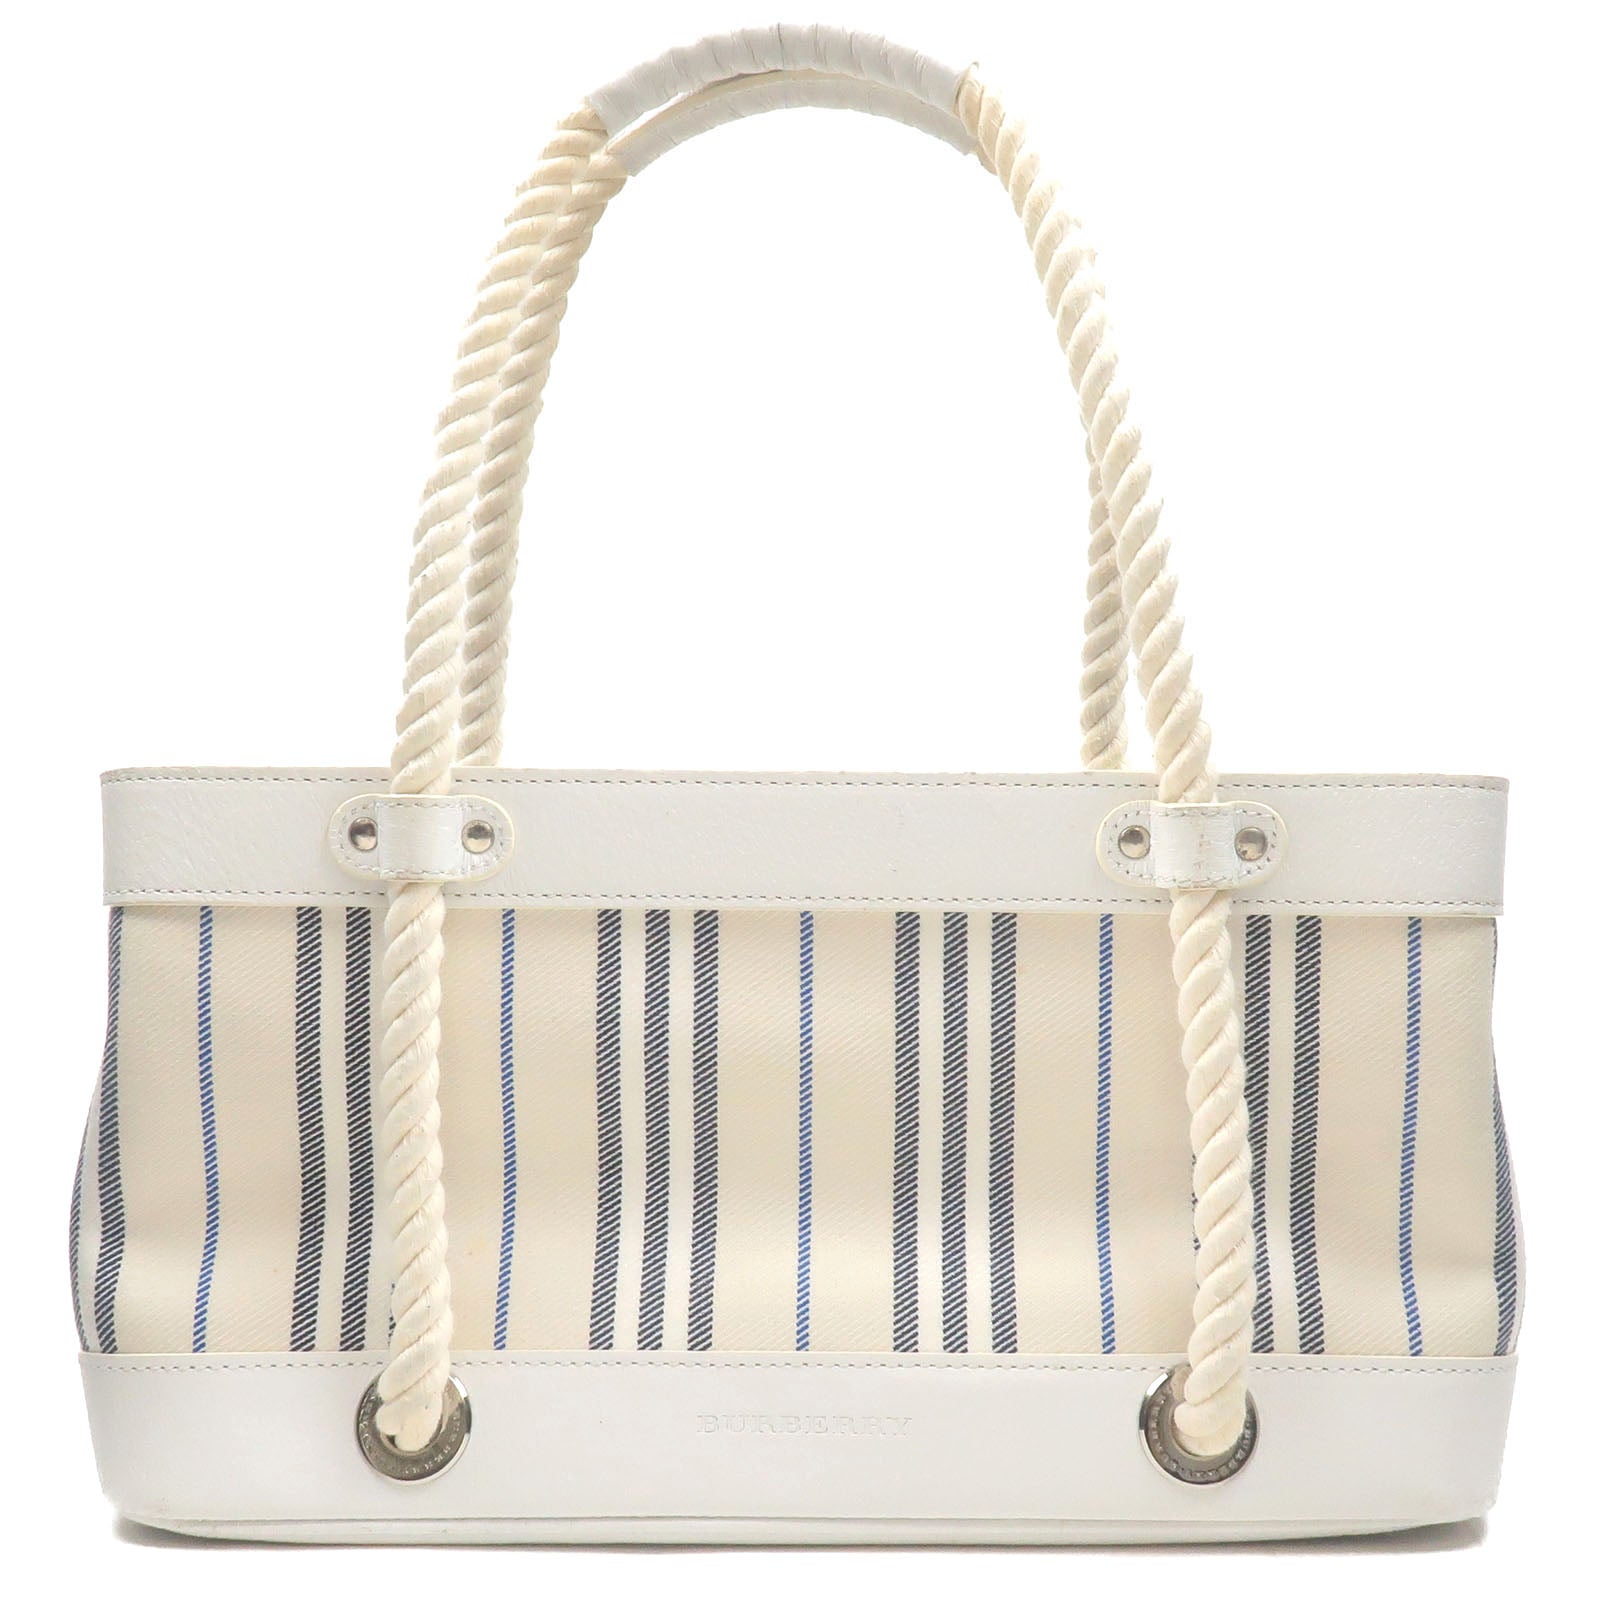 BURBERRY-Stripe-Canvas-Leather-Hand-Bag-Ivory-White